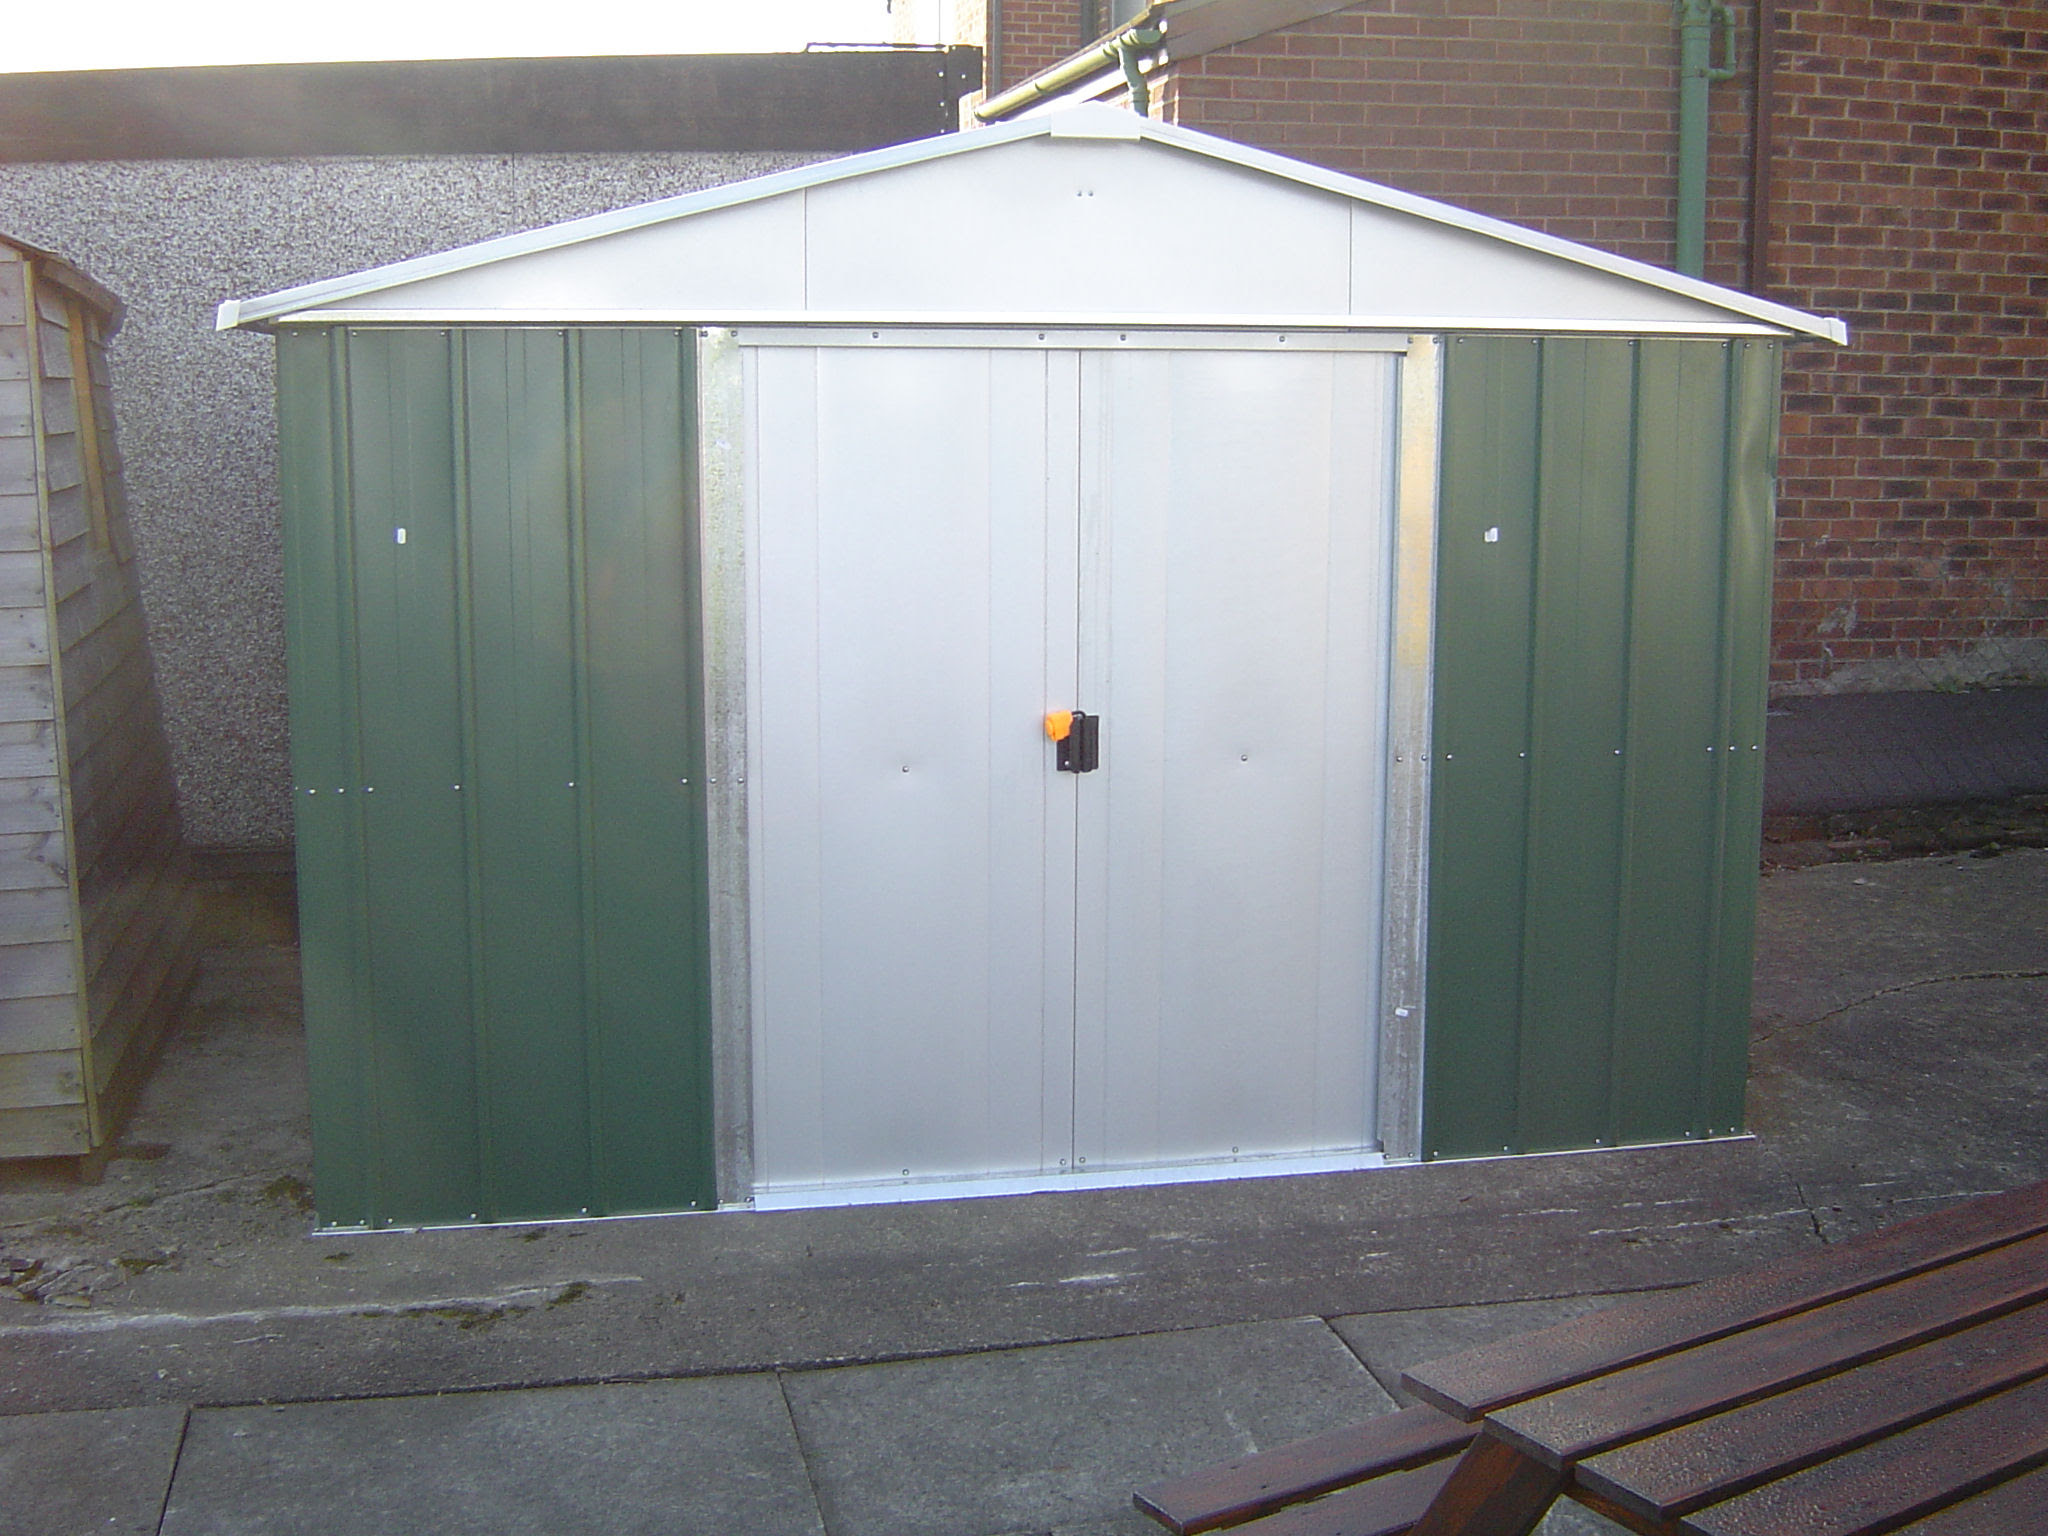 Here a How to build a yardmaster shed | Shed plans for free